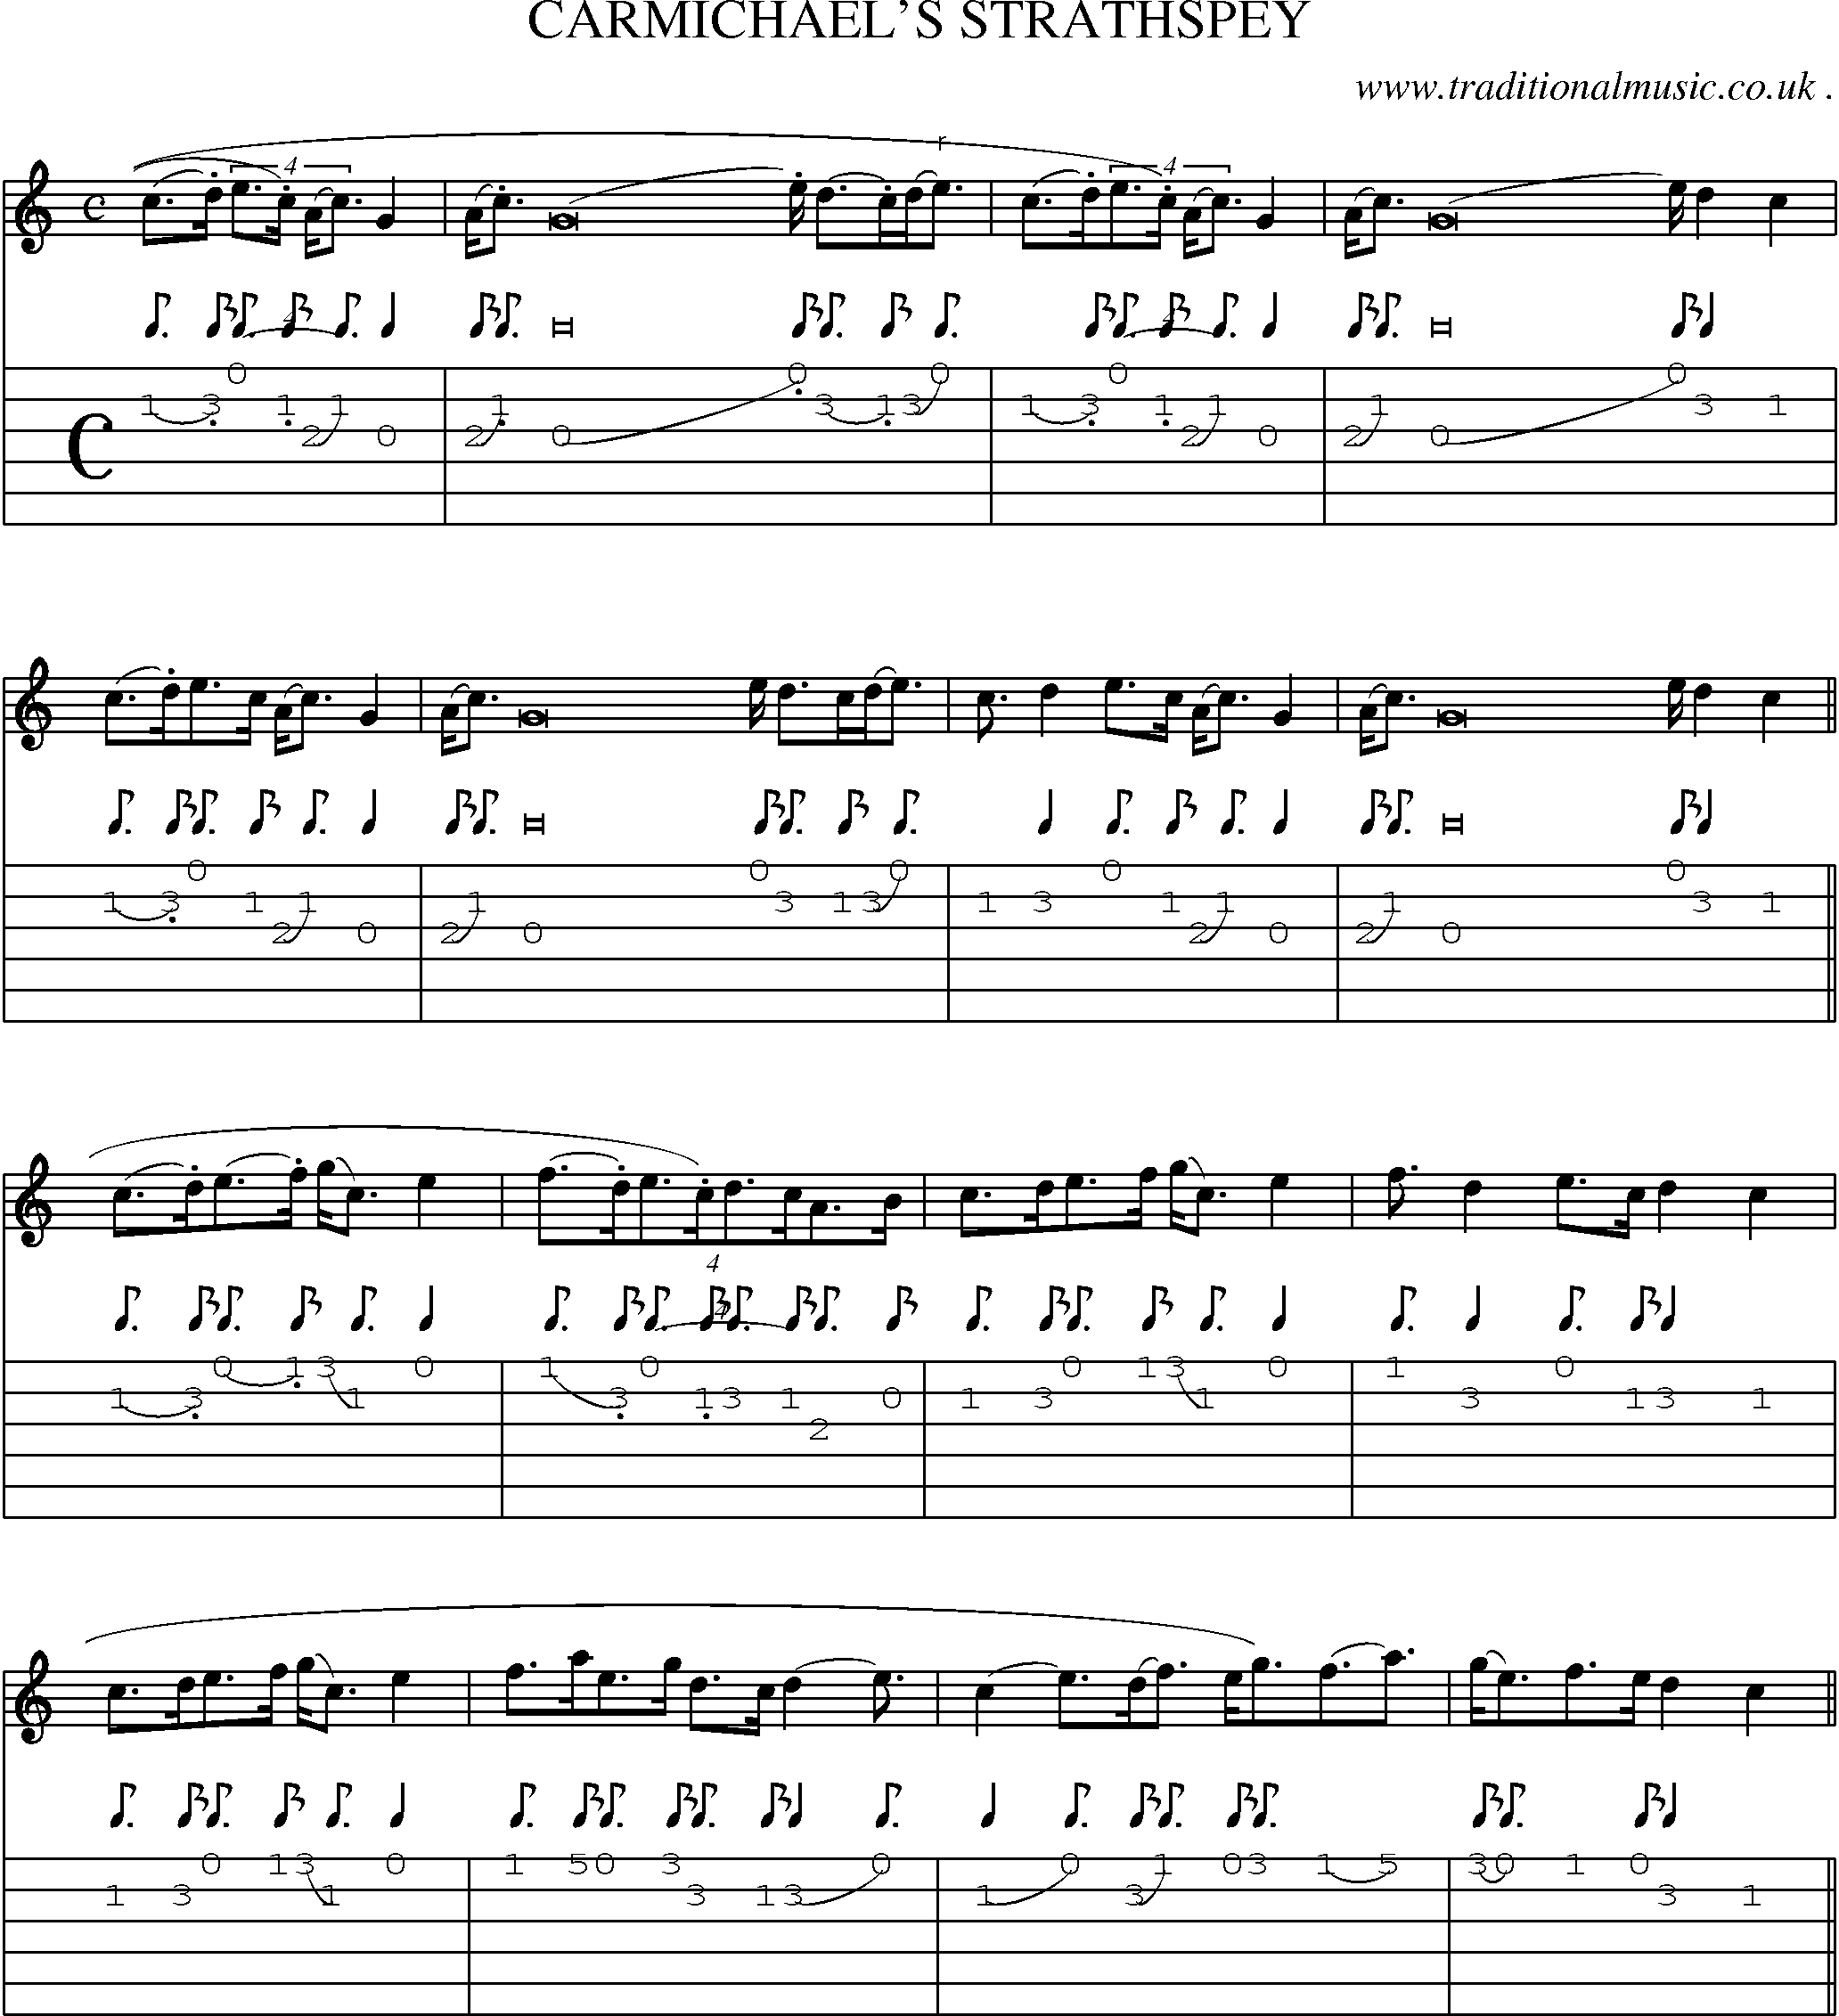 Sheet-Music and Guitar Tabs for Carmichaels Strathspey